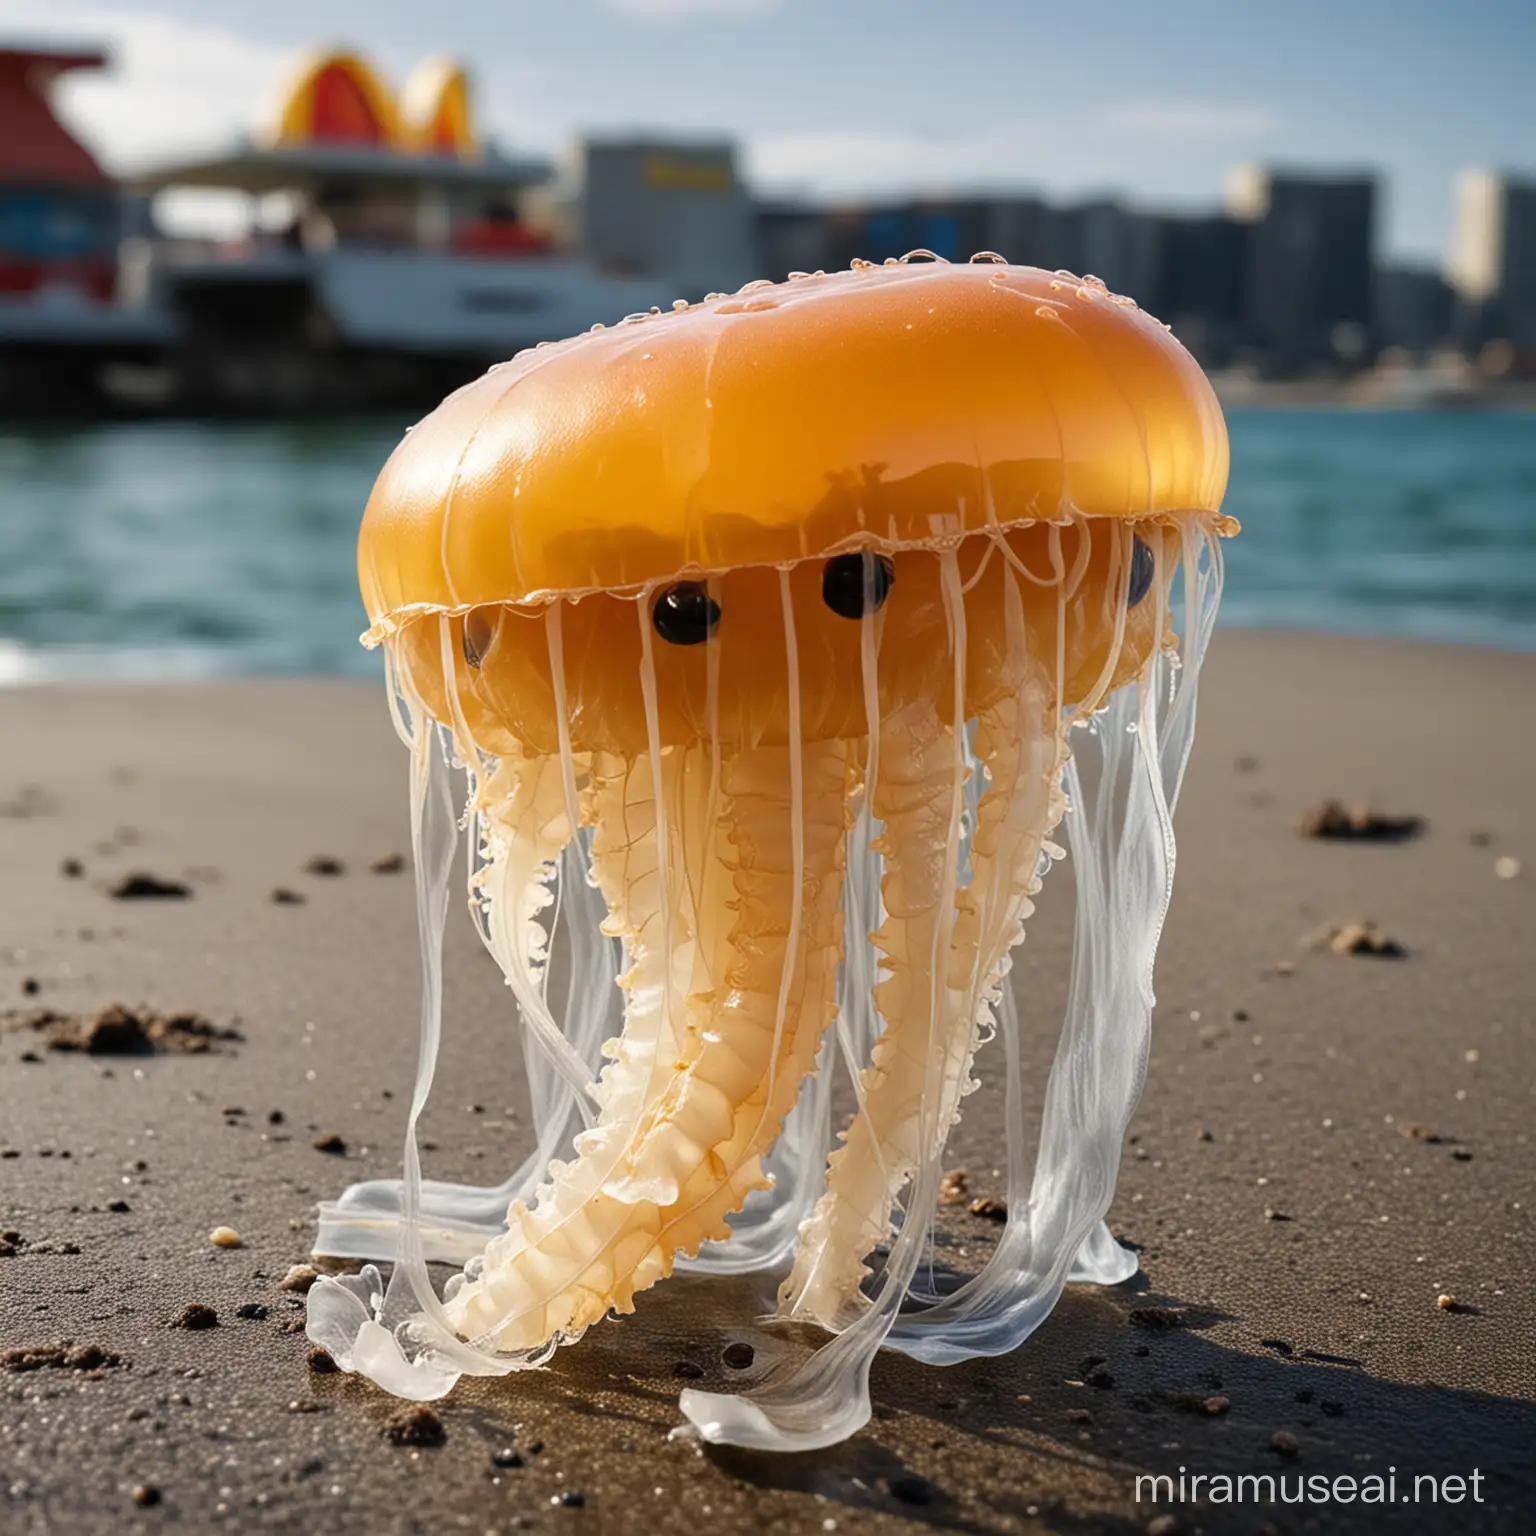 a jelly fish eating Mc Donalds